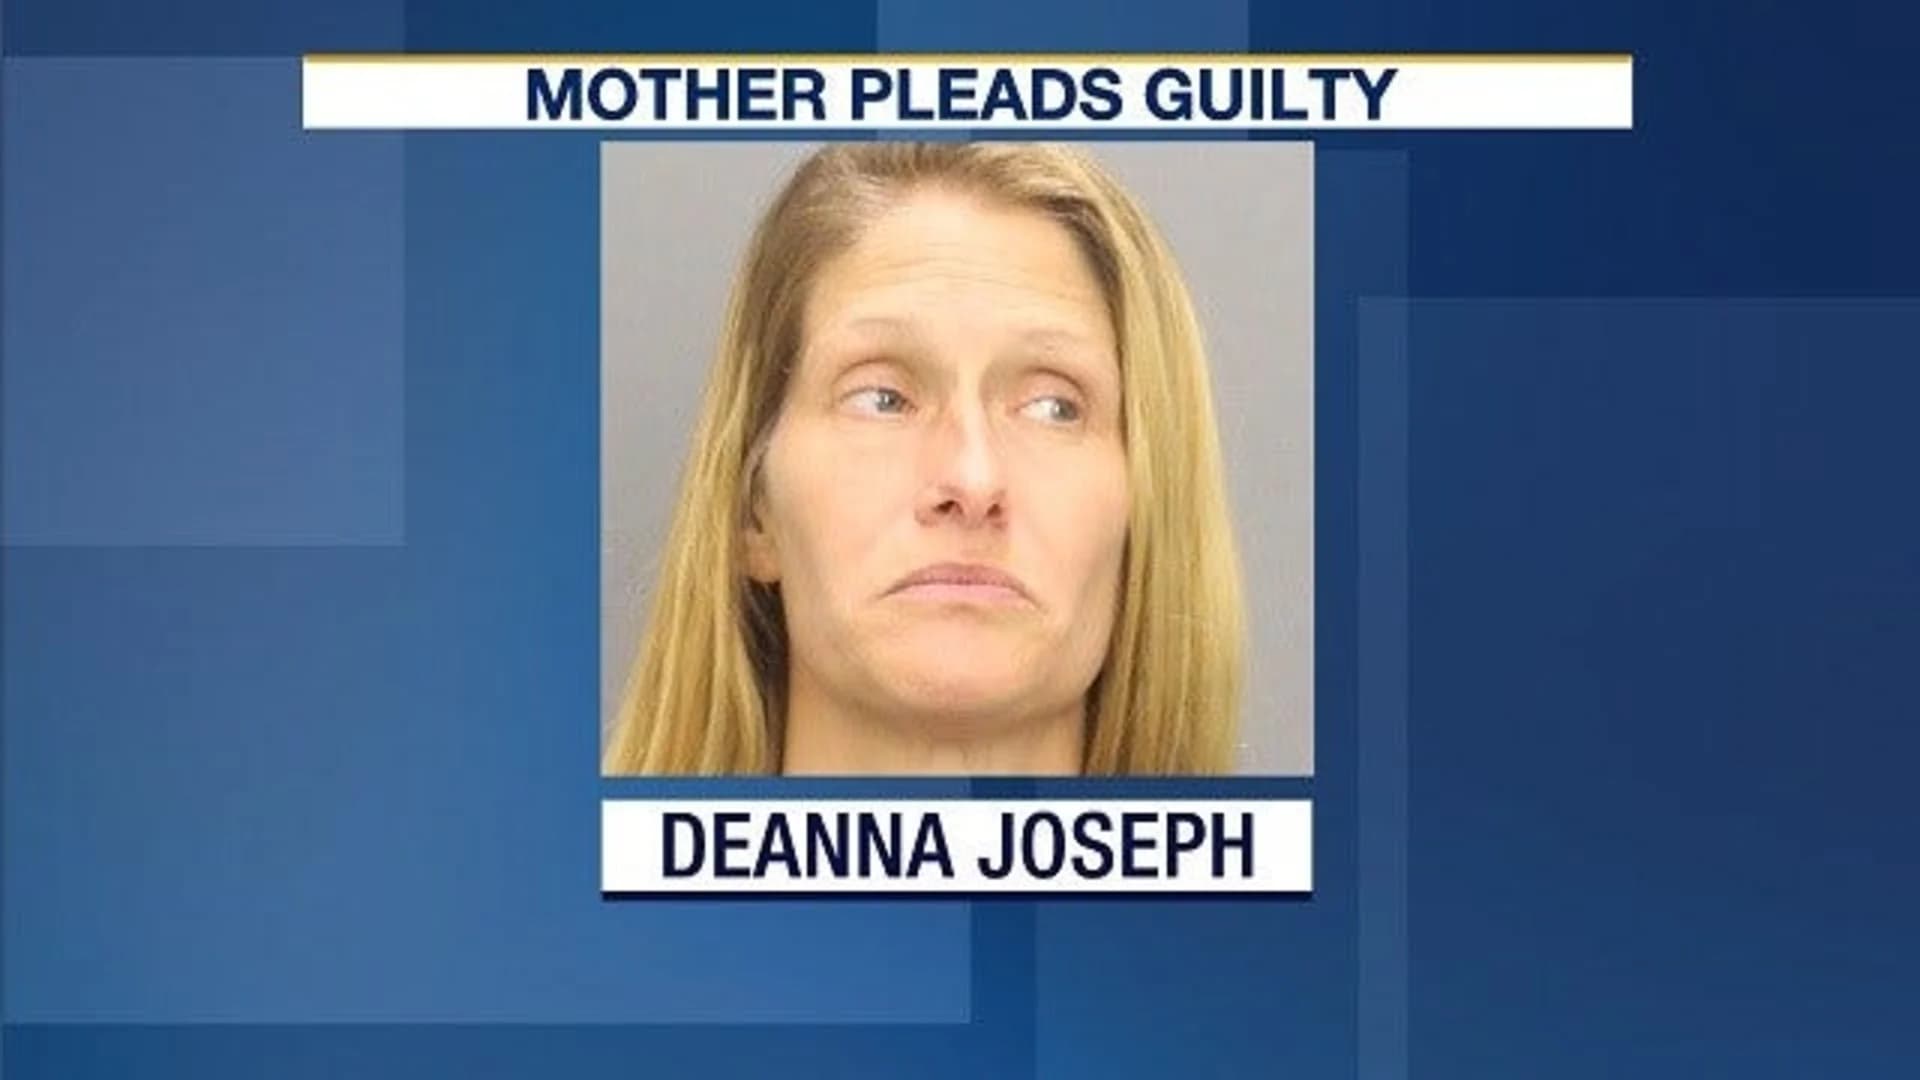 Mom pleads guilty to manslaughter in toddler car seat death